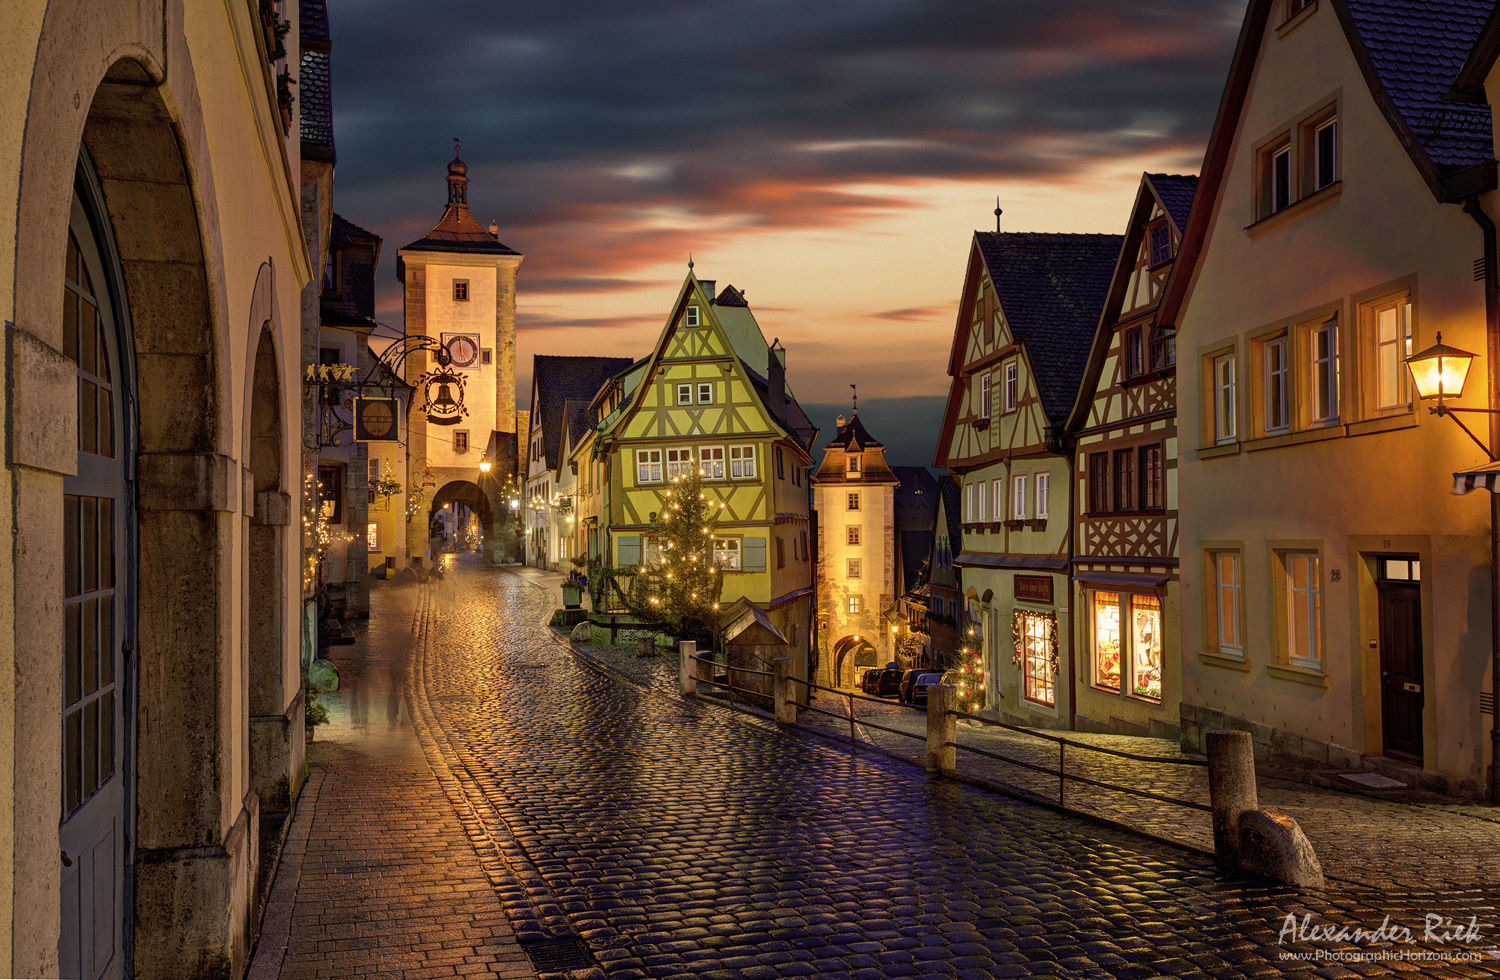 man made, rothenburg, architecture, germany, house, night, street